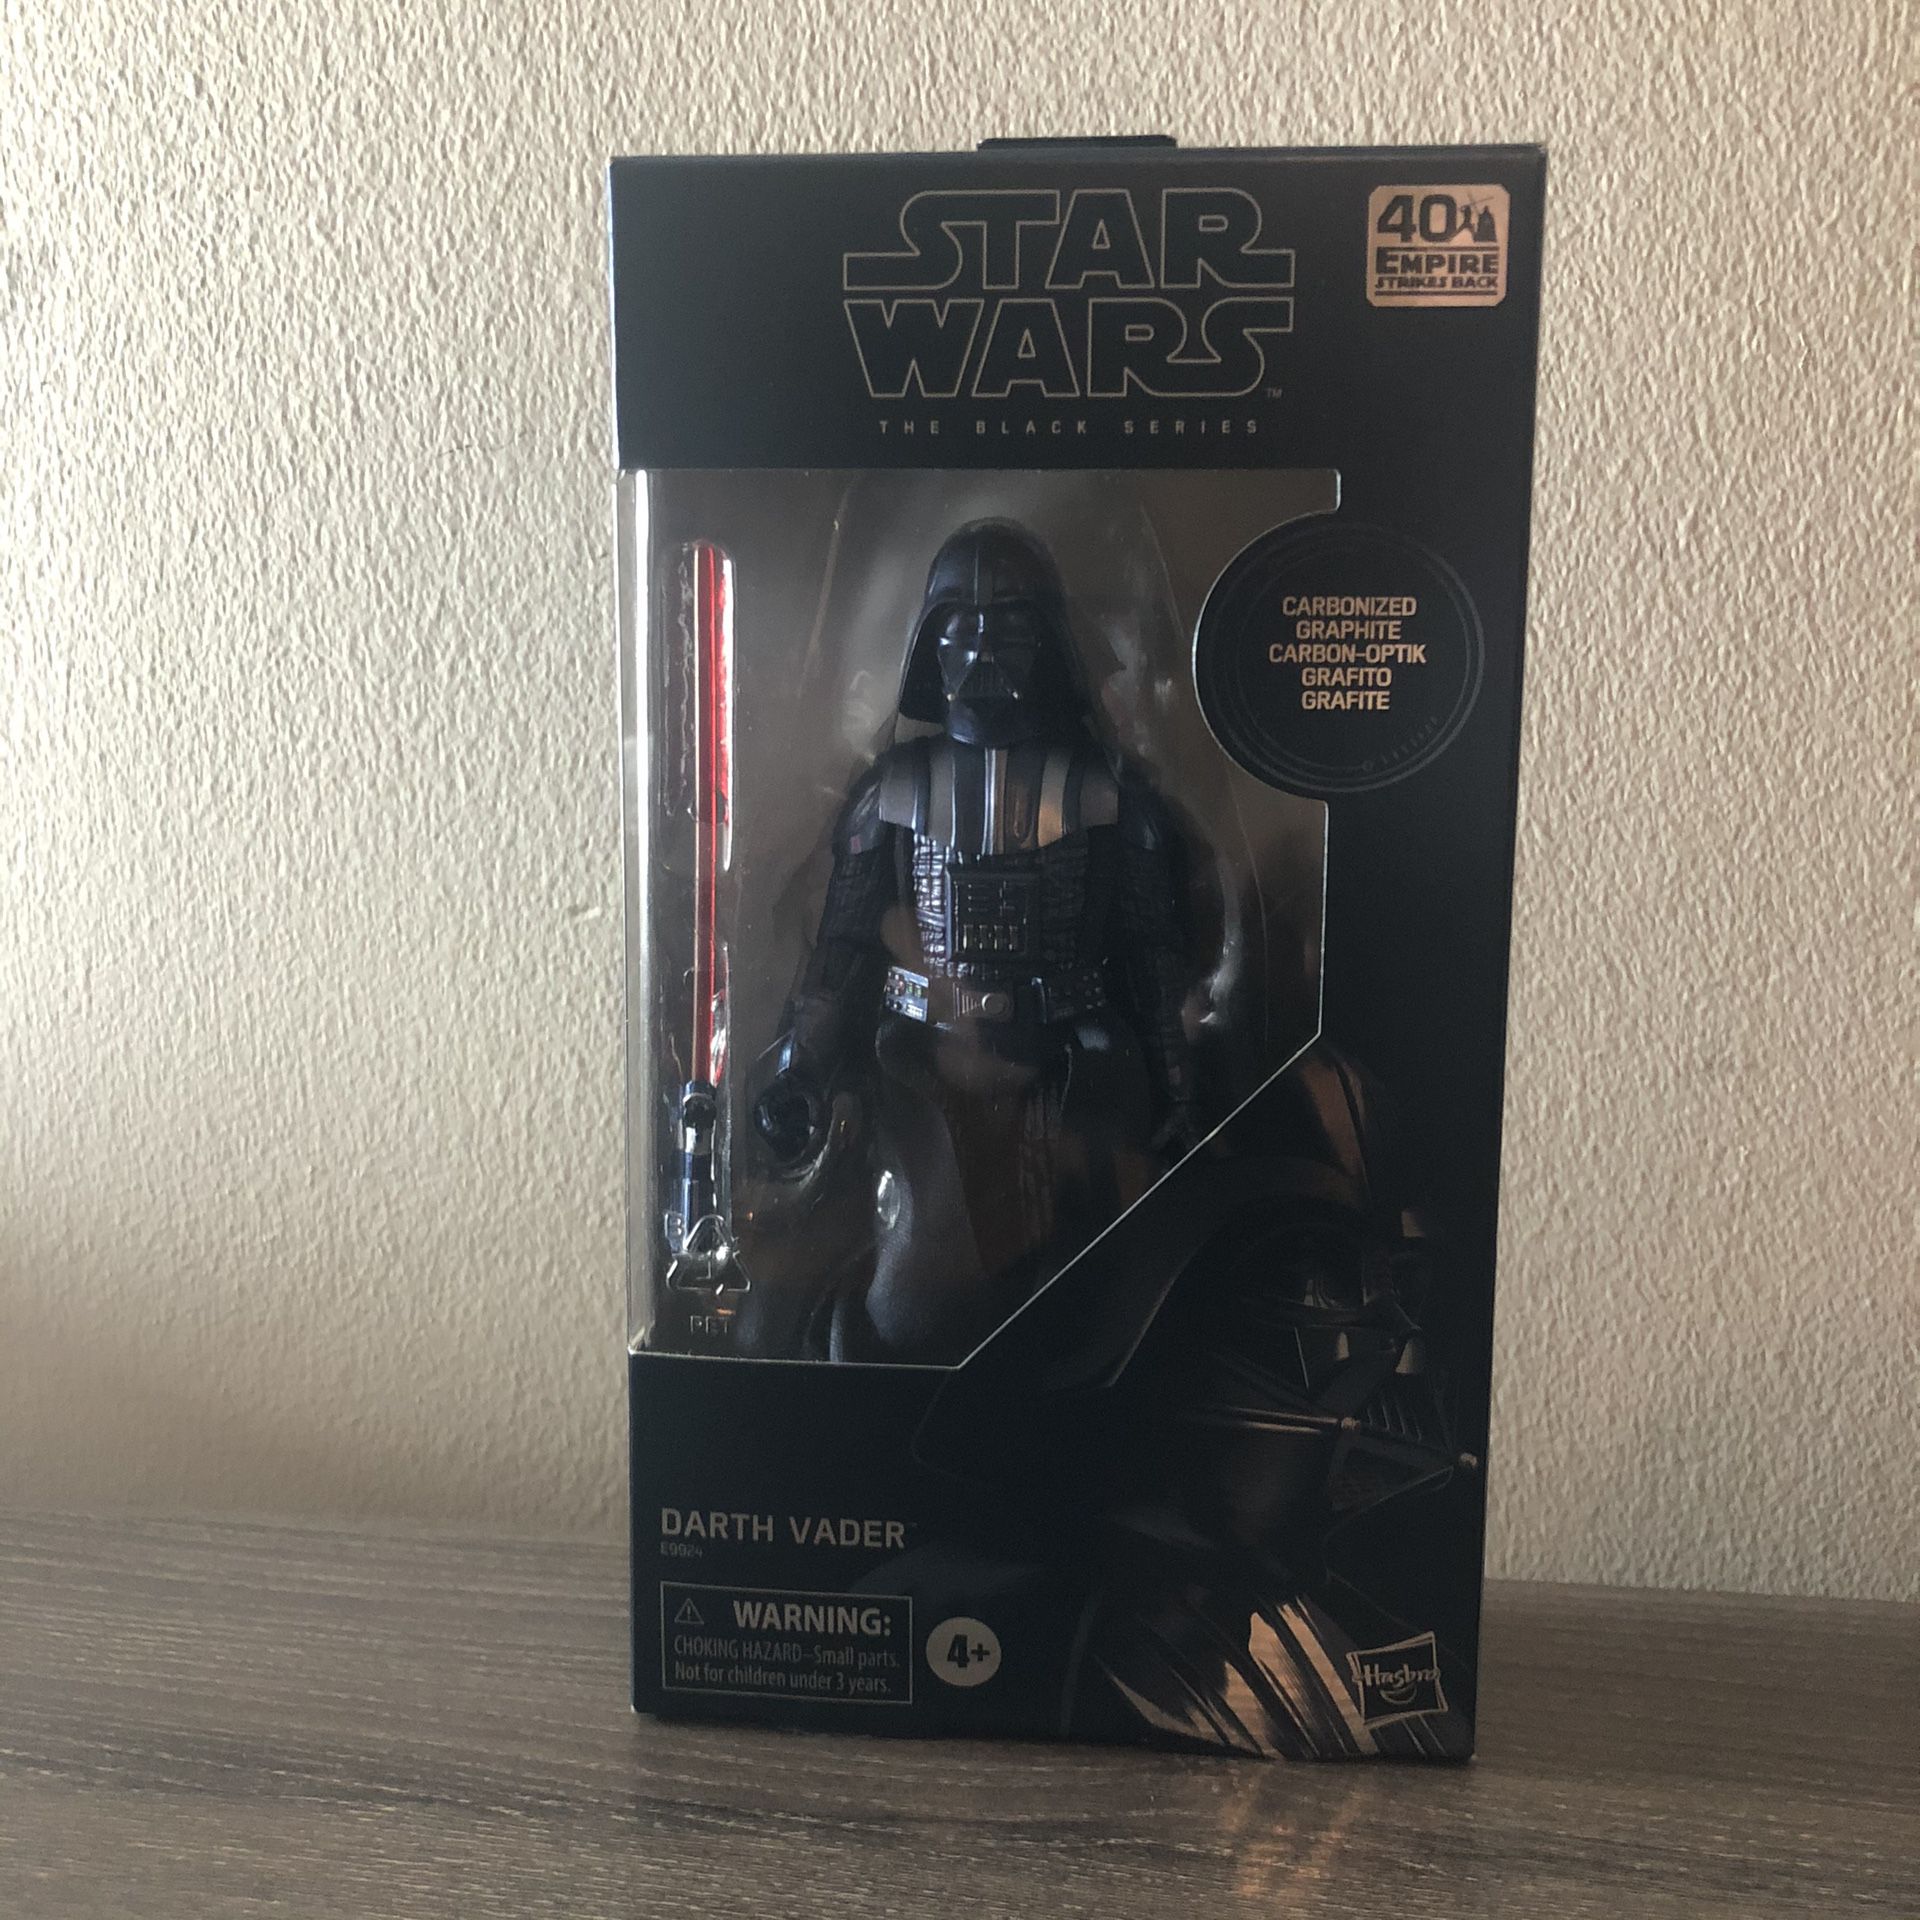 Star Wars The Black Series Carbonized Collection Darth Vader Toy 6 Inch Scale - Amazon Exclusive - New! Sealed!